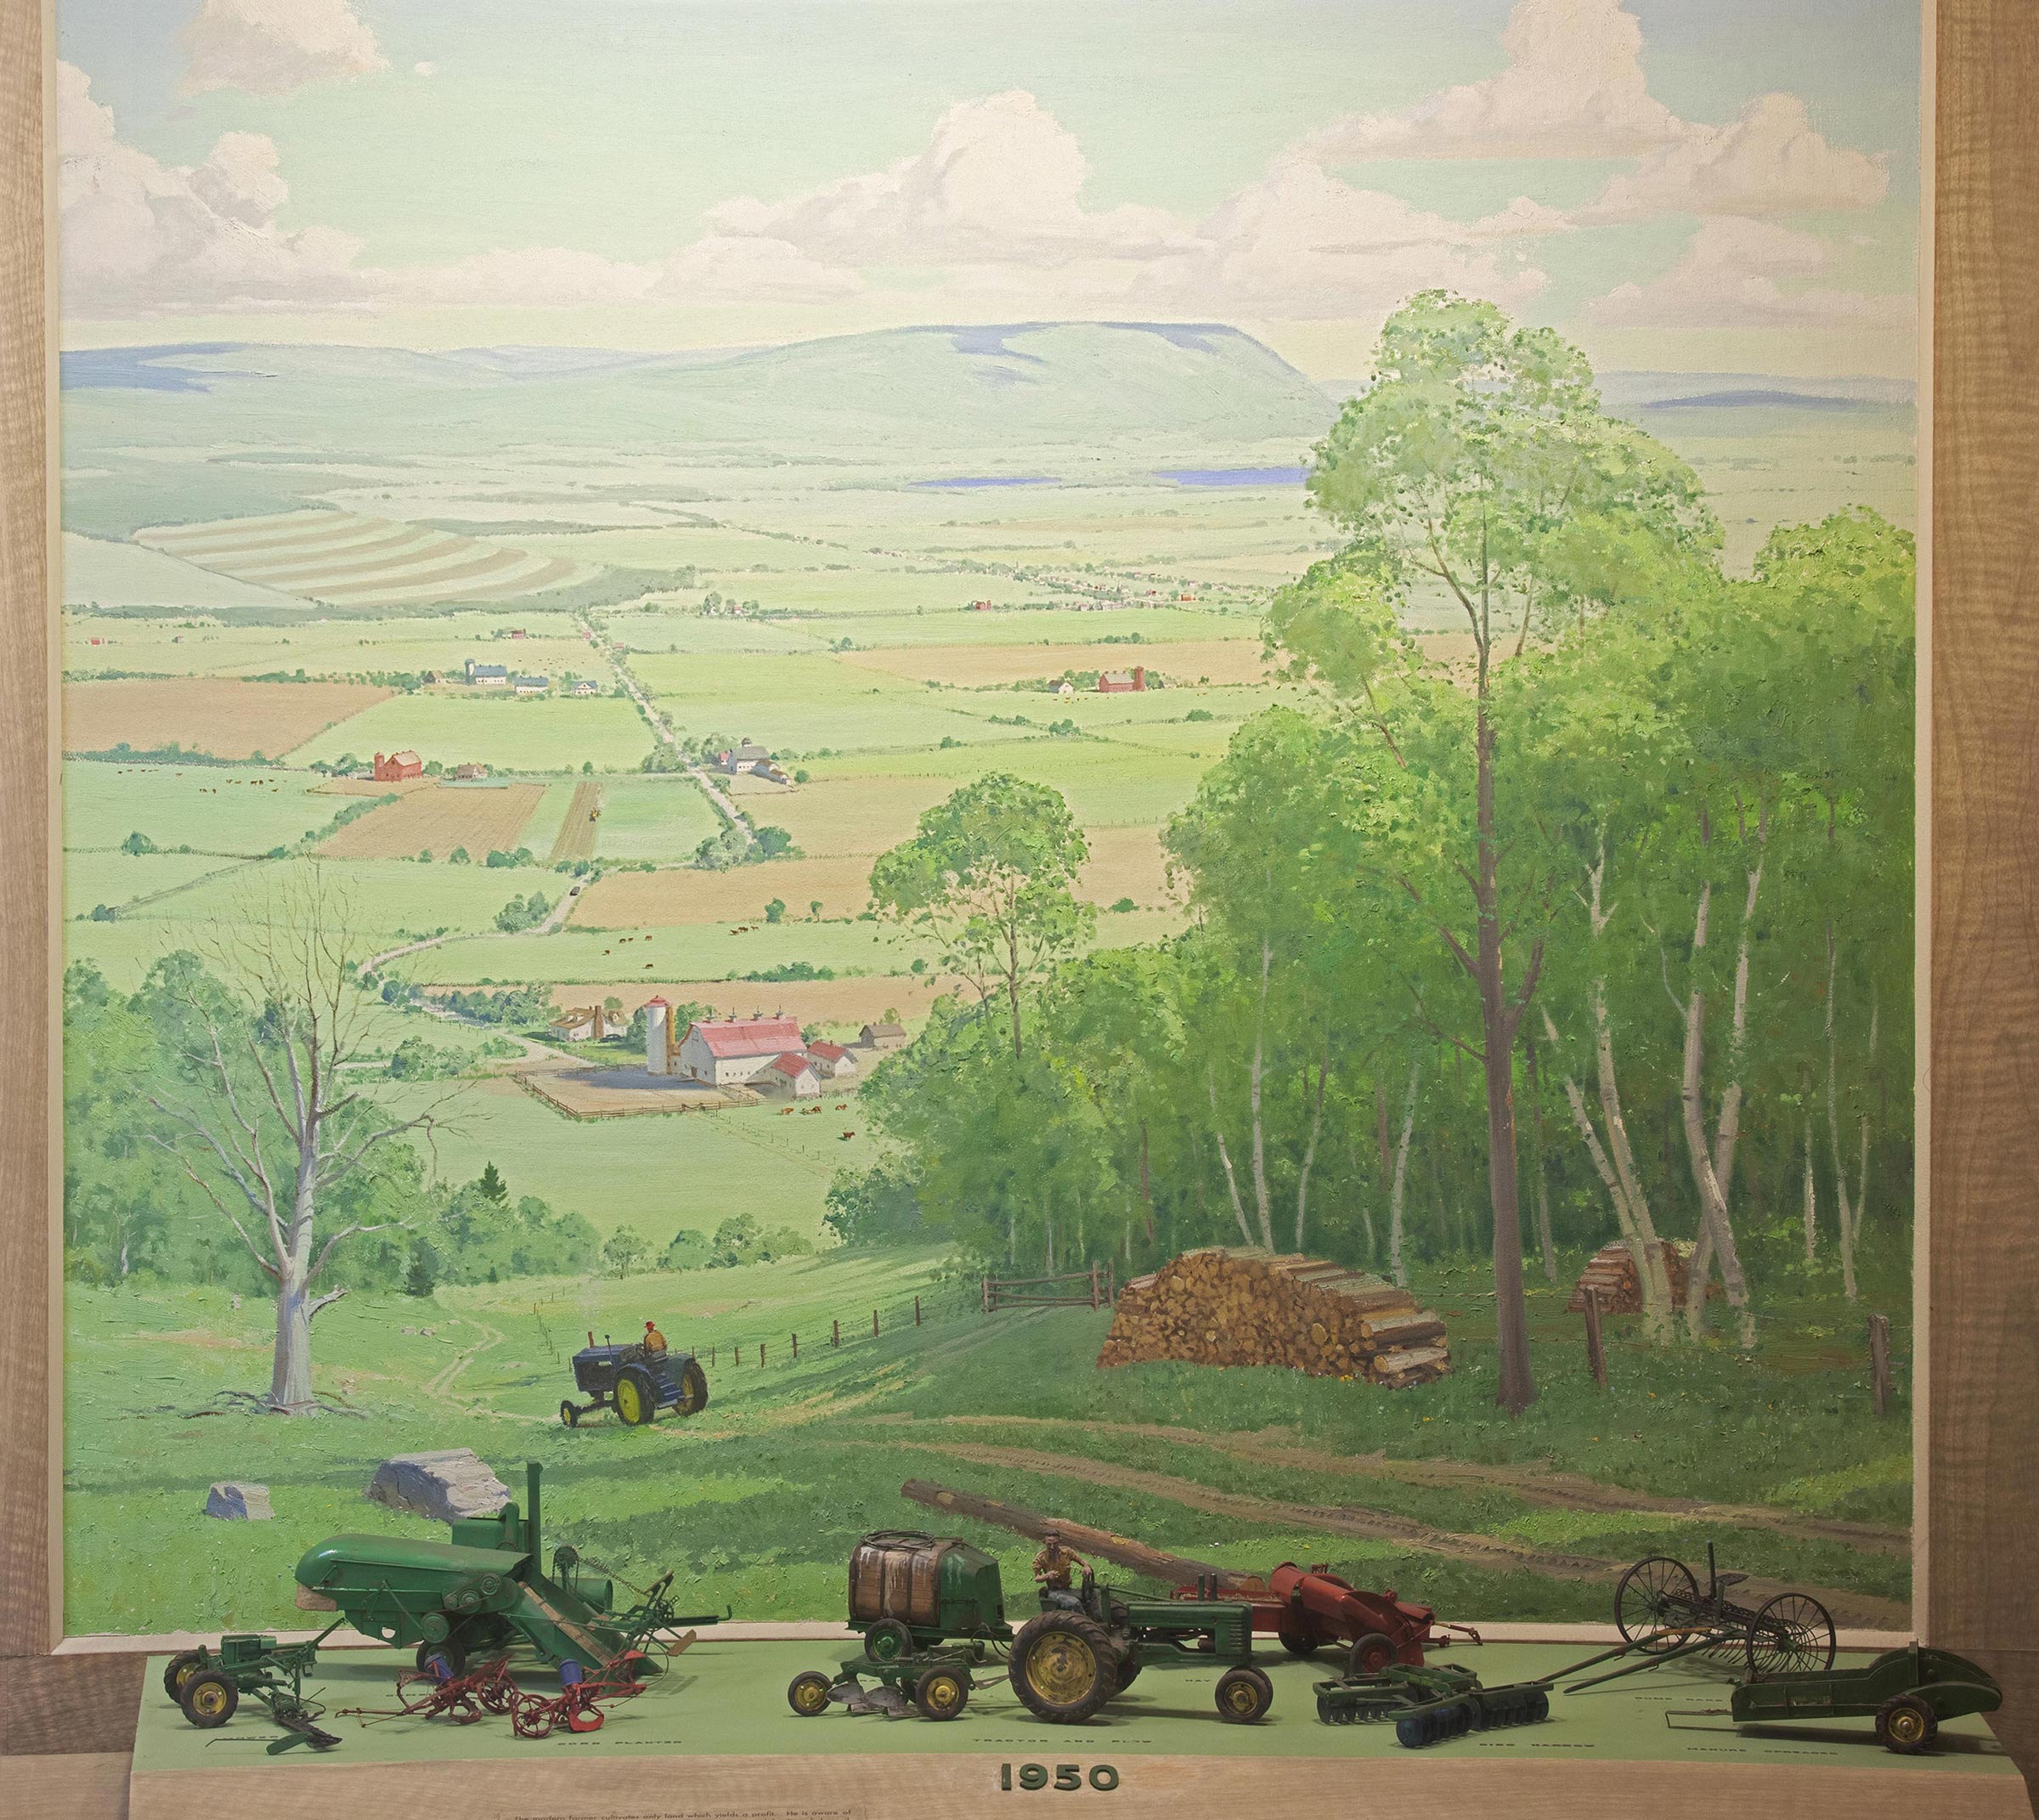 Scale models of farming tools from 1950 with background painting of a landscape with a farm.